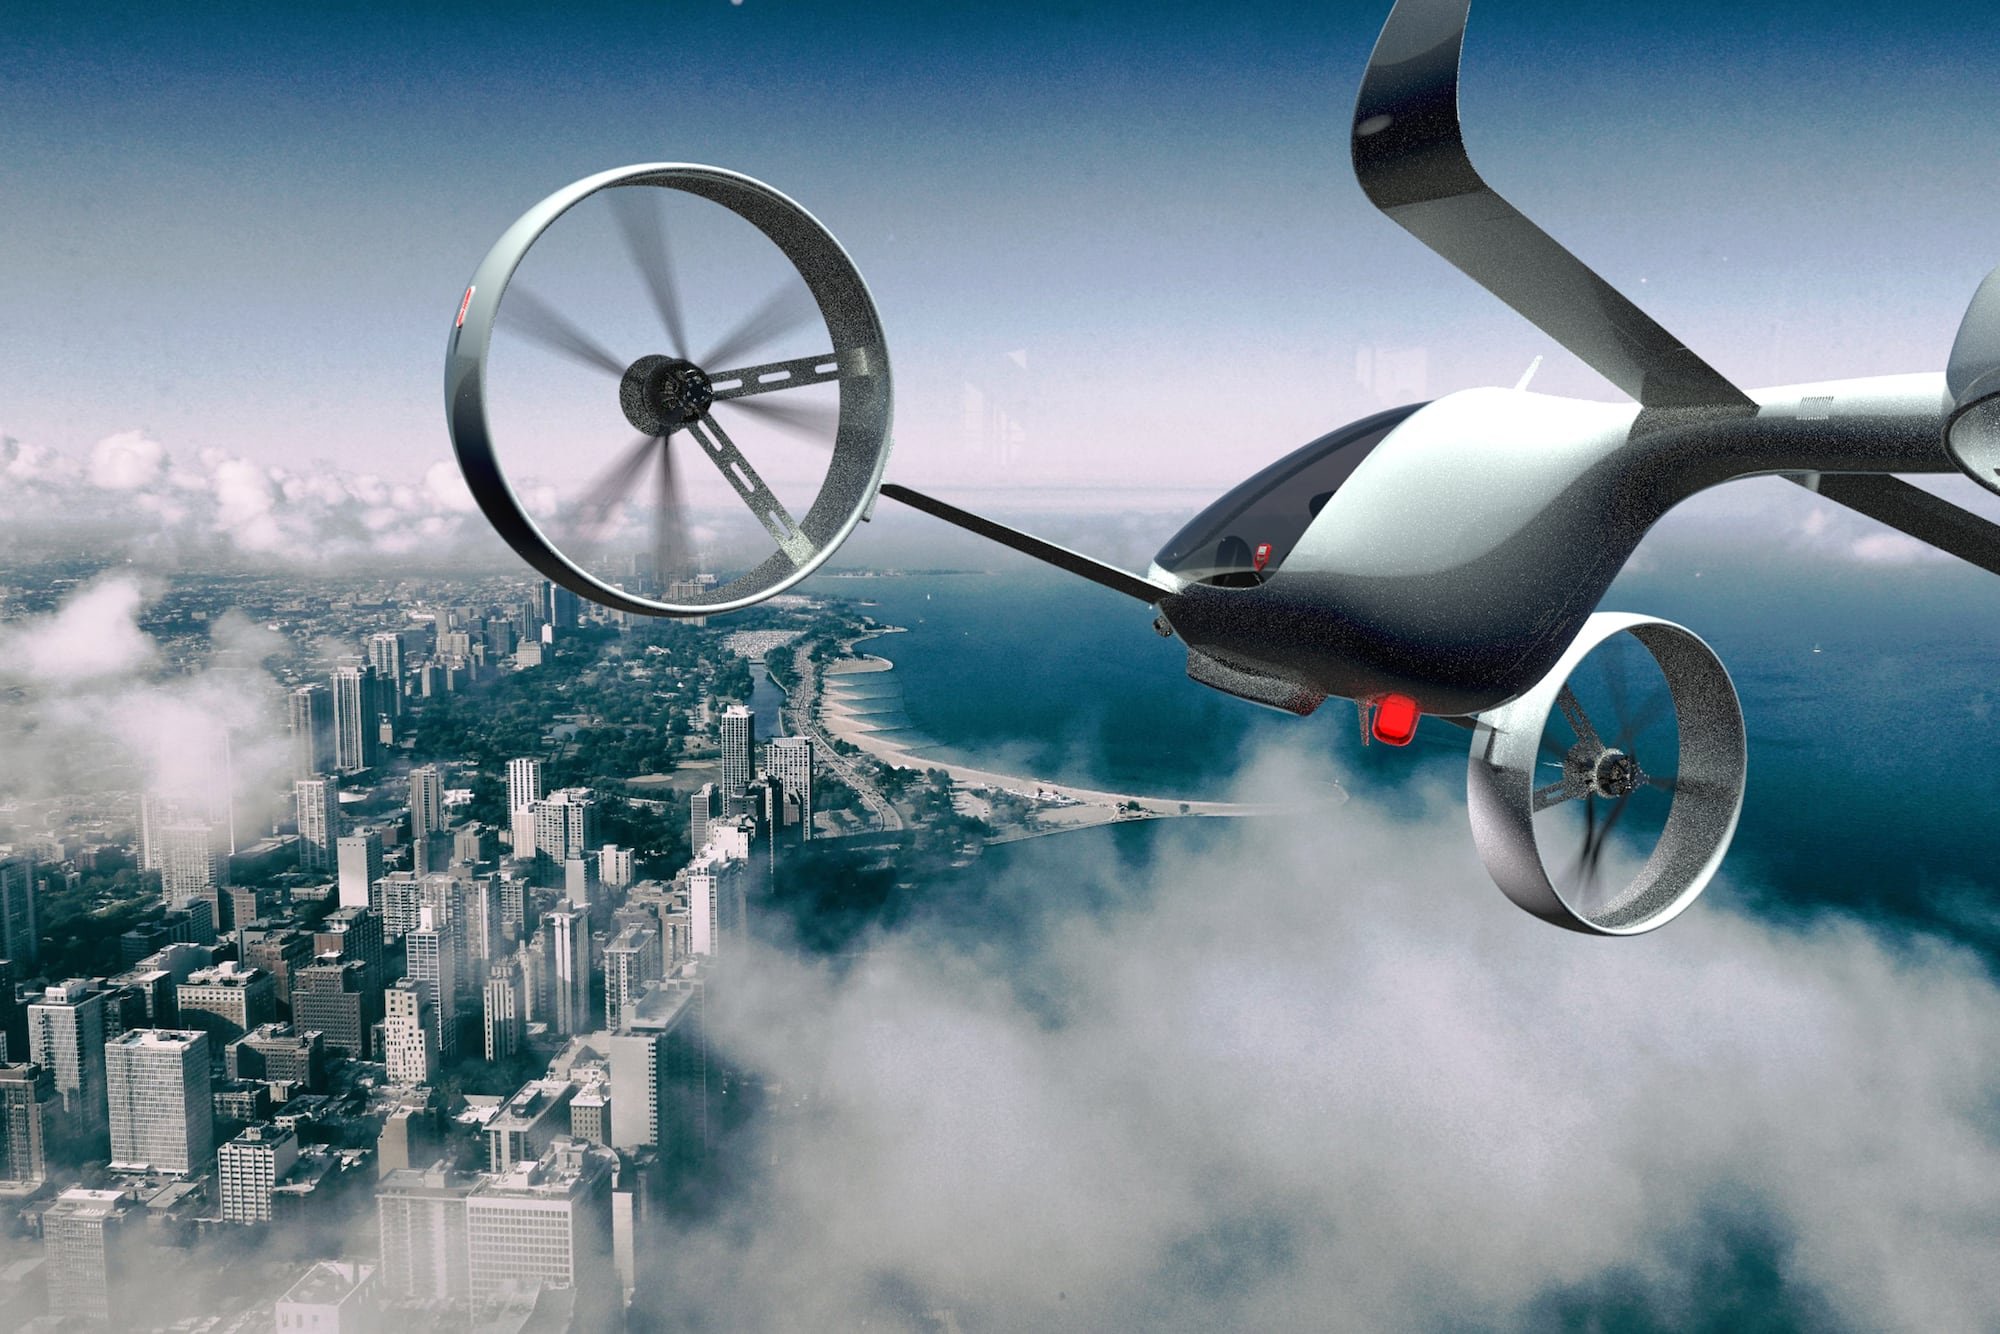 This electric VTOL aircraft works without a runway